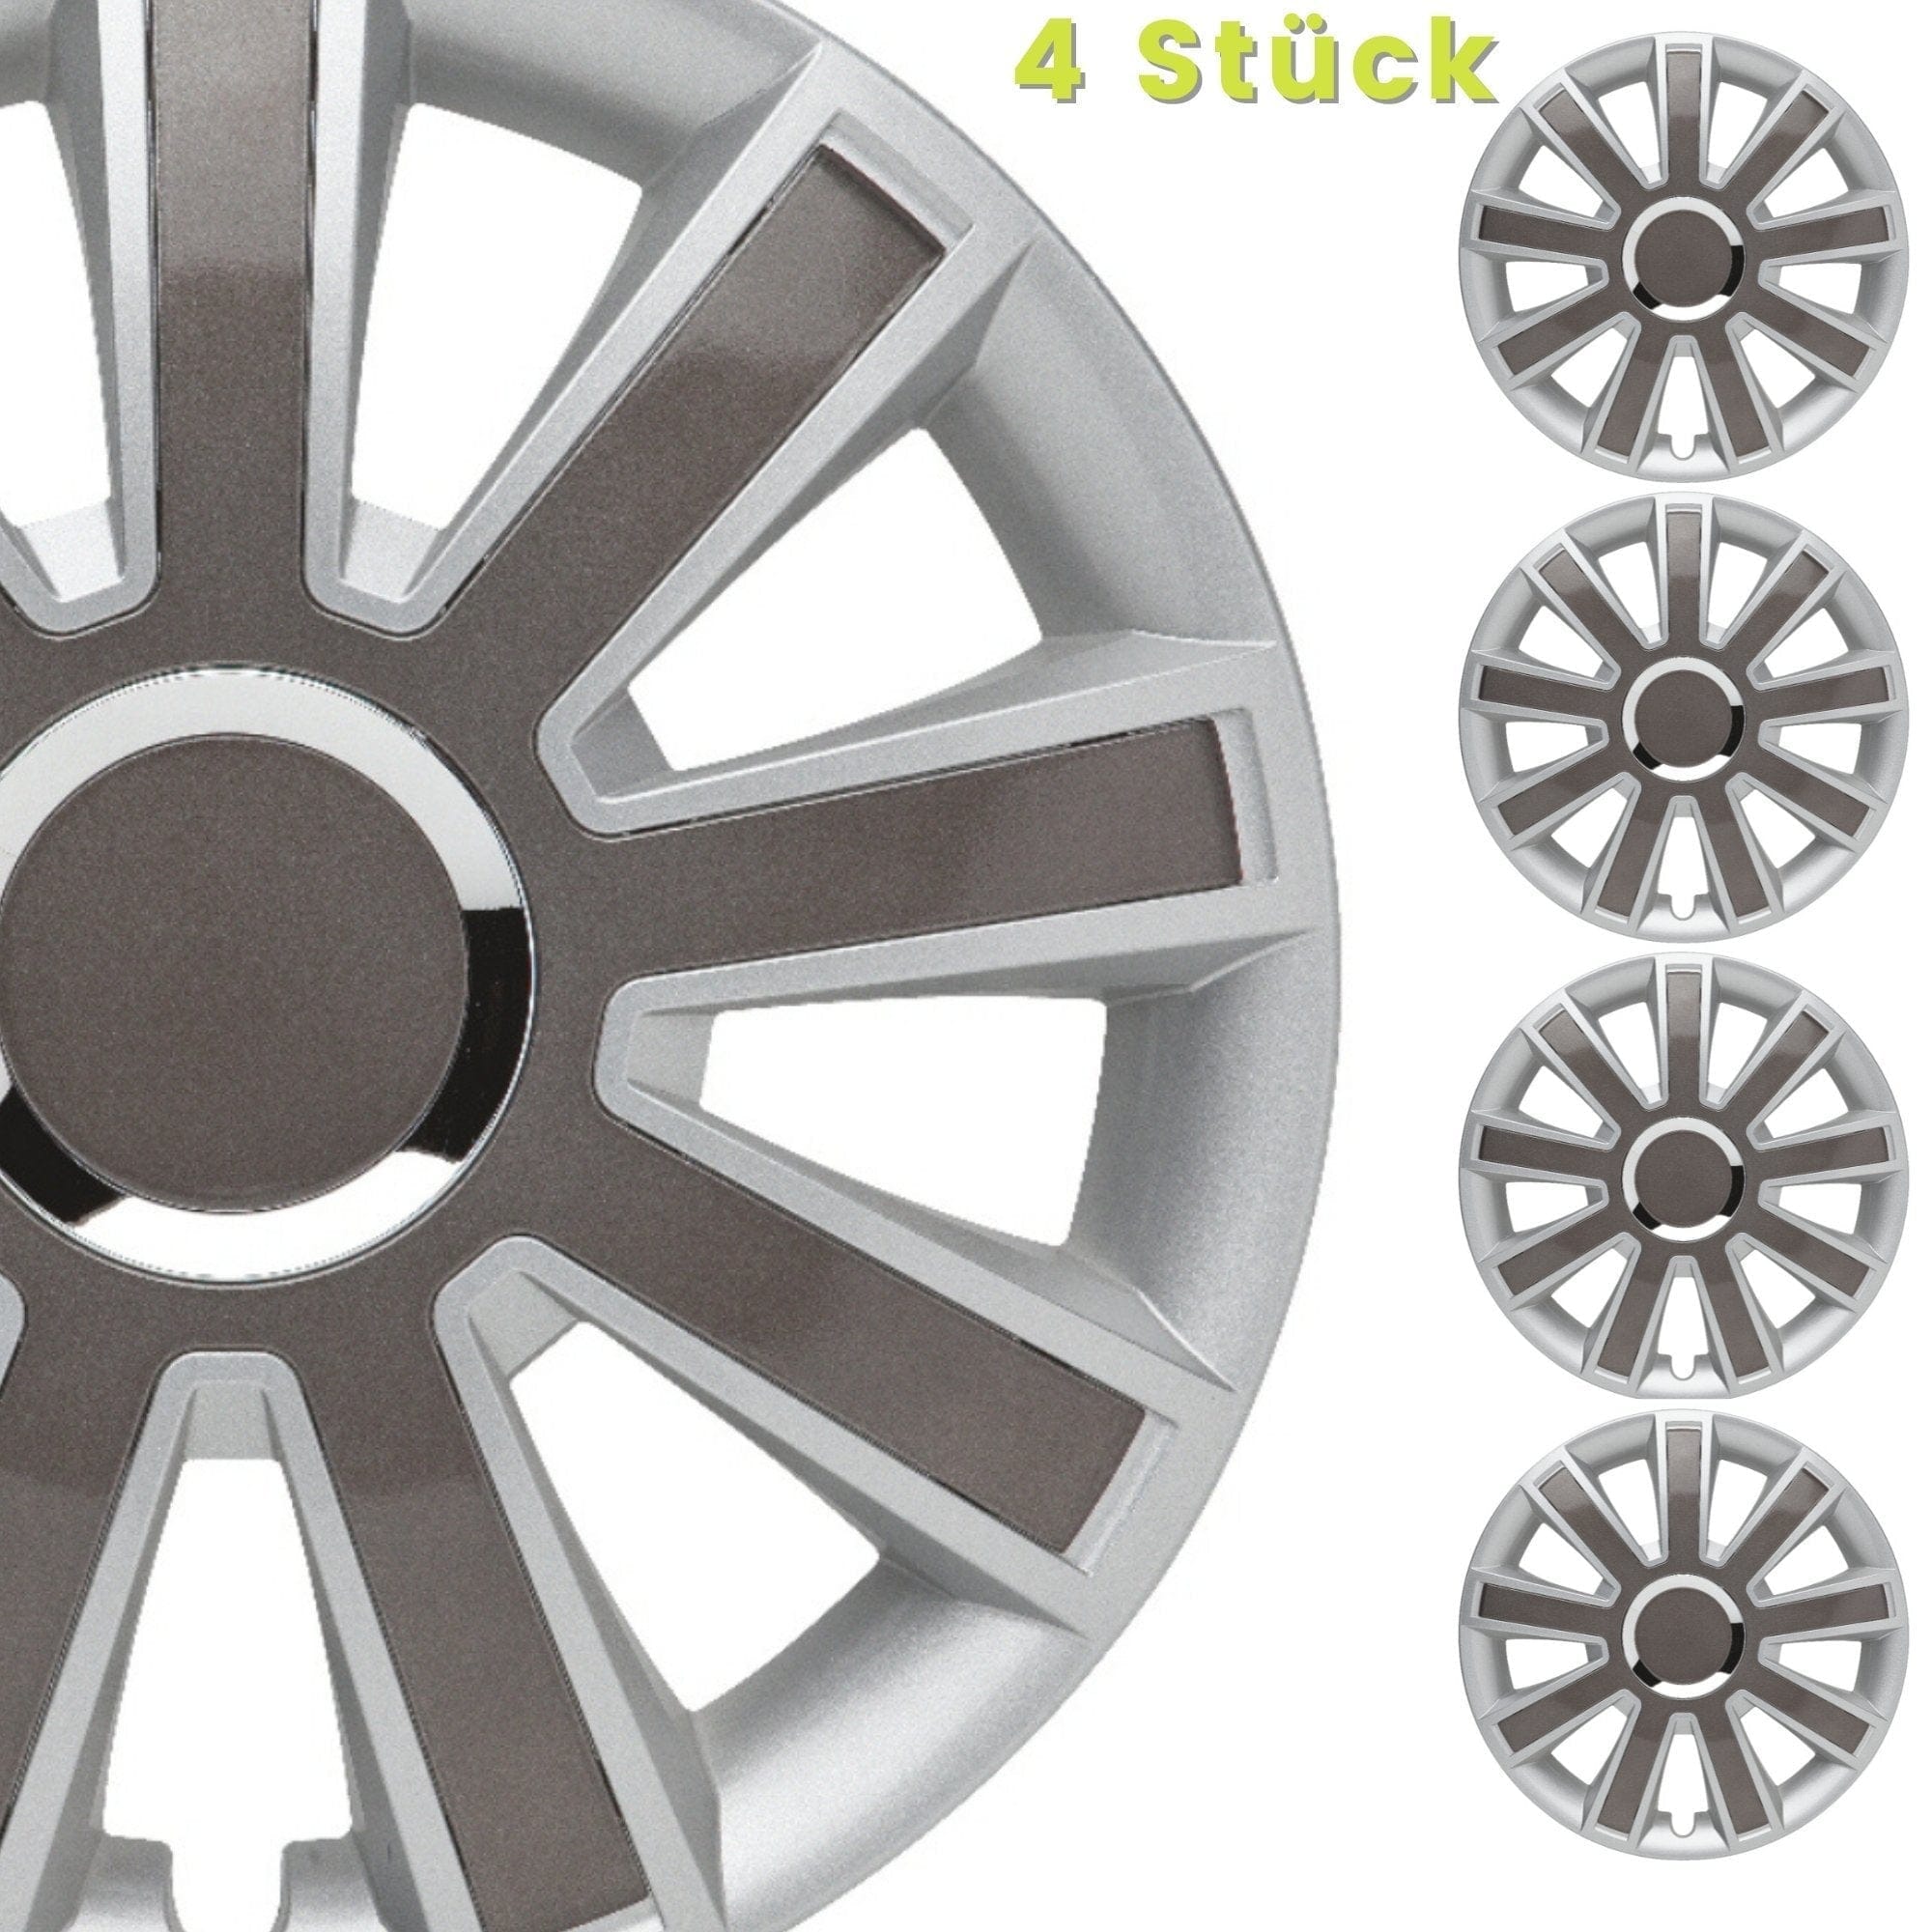 Kuglo hubcaps Flash silver gray black 4 pieces